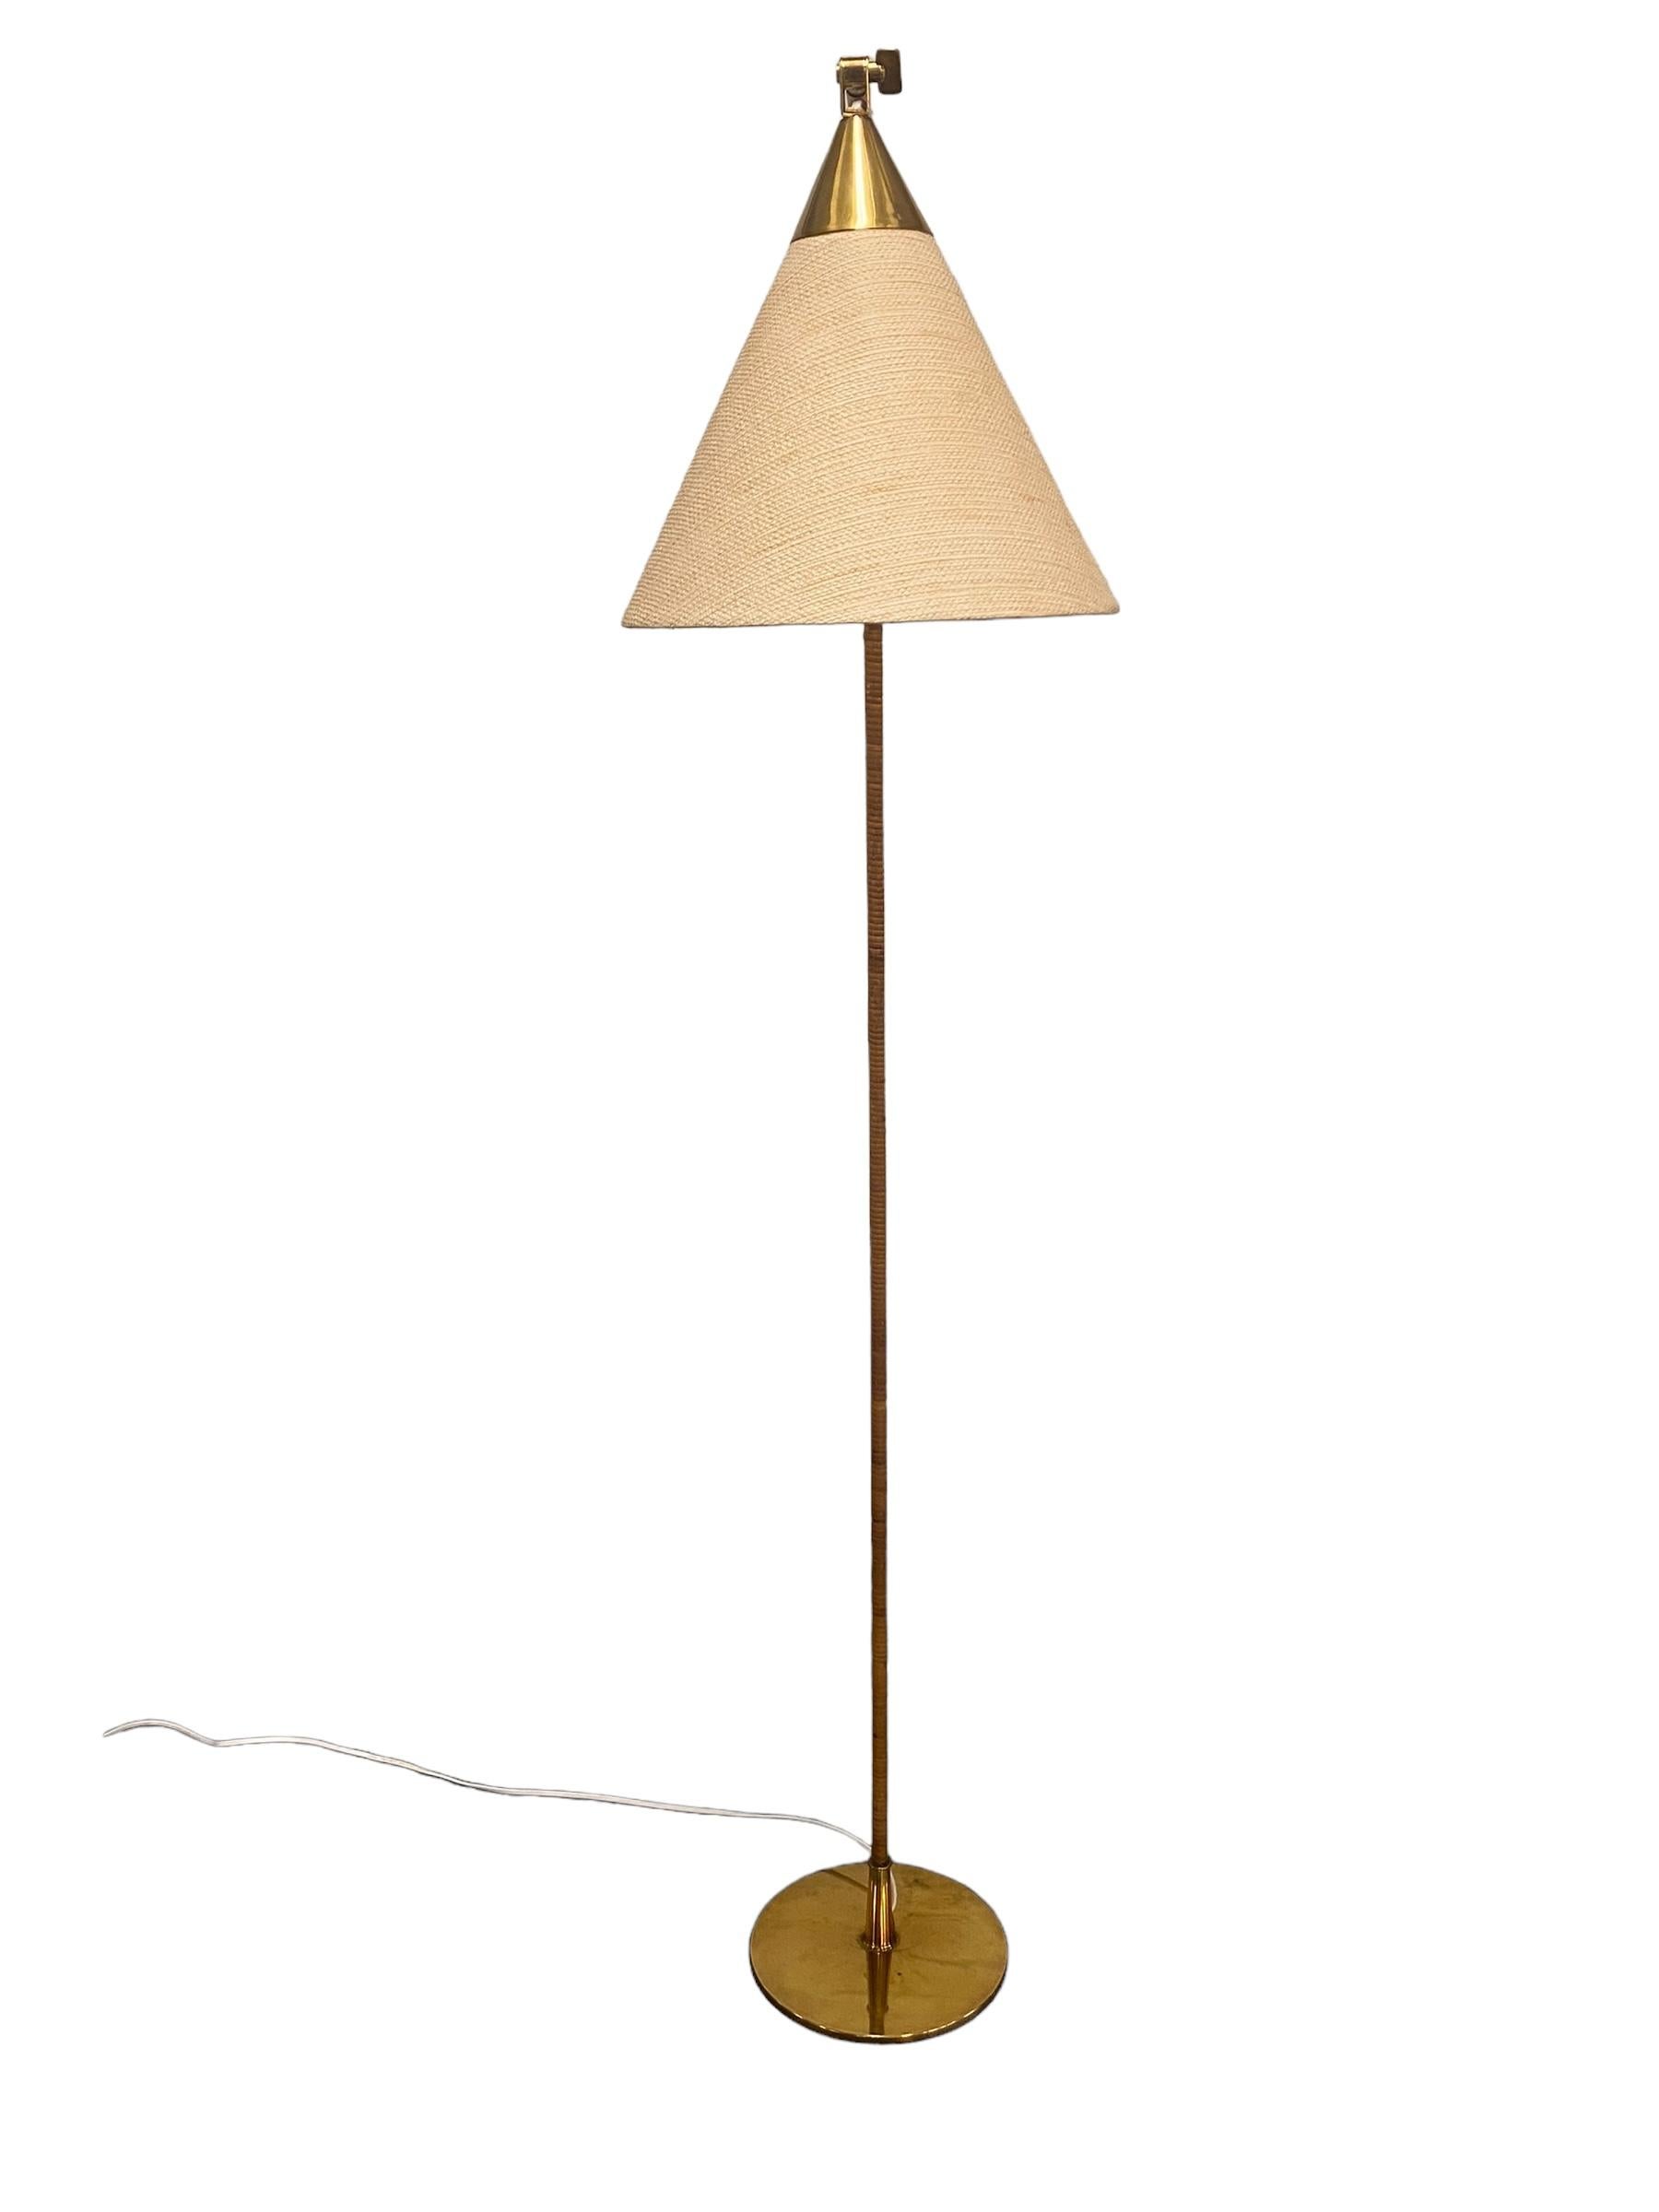 Mid-20th Century A Beautiful Paavo Tynell Floor Lamp Model 9605 for Taito Oy, 1950s  For Sale